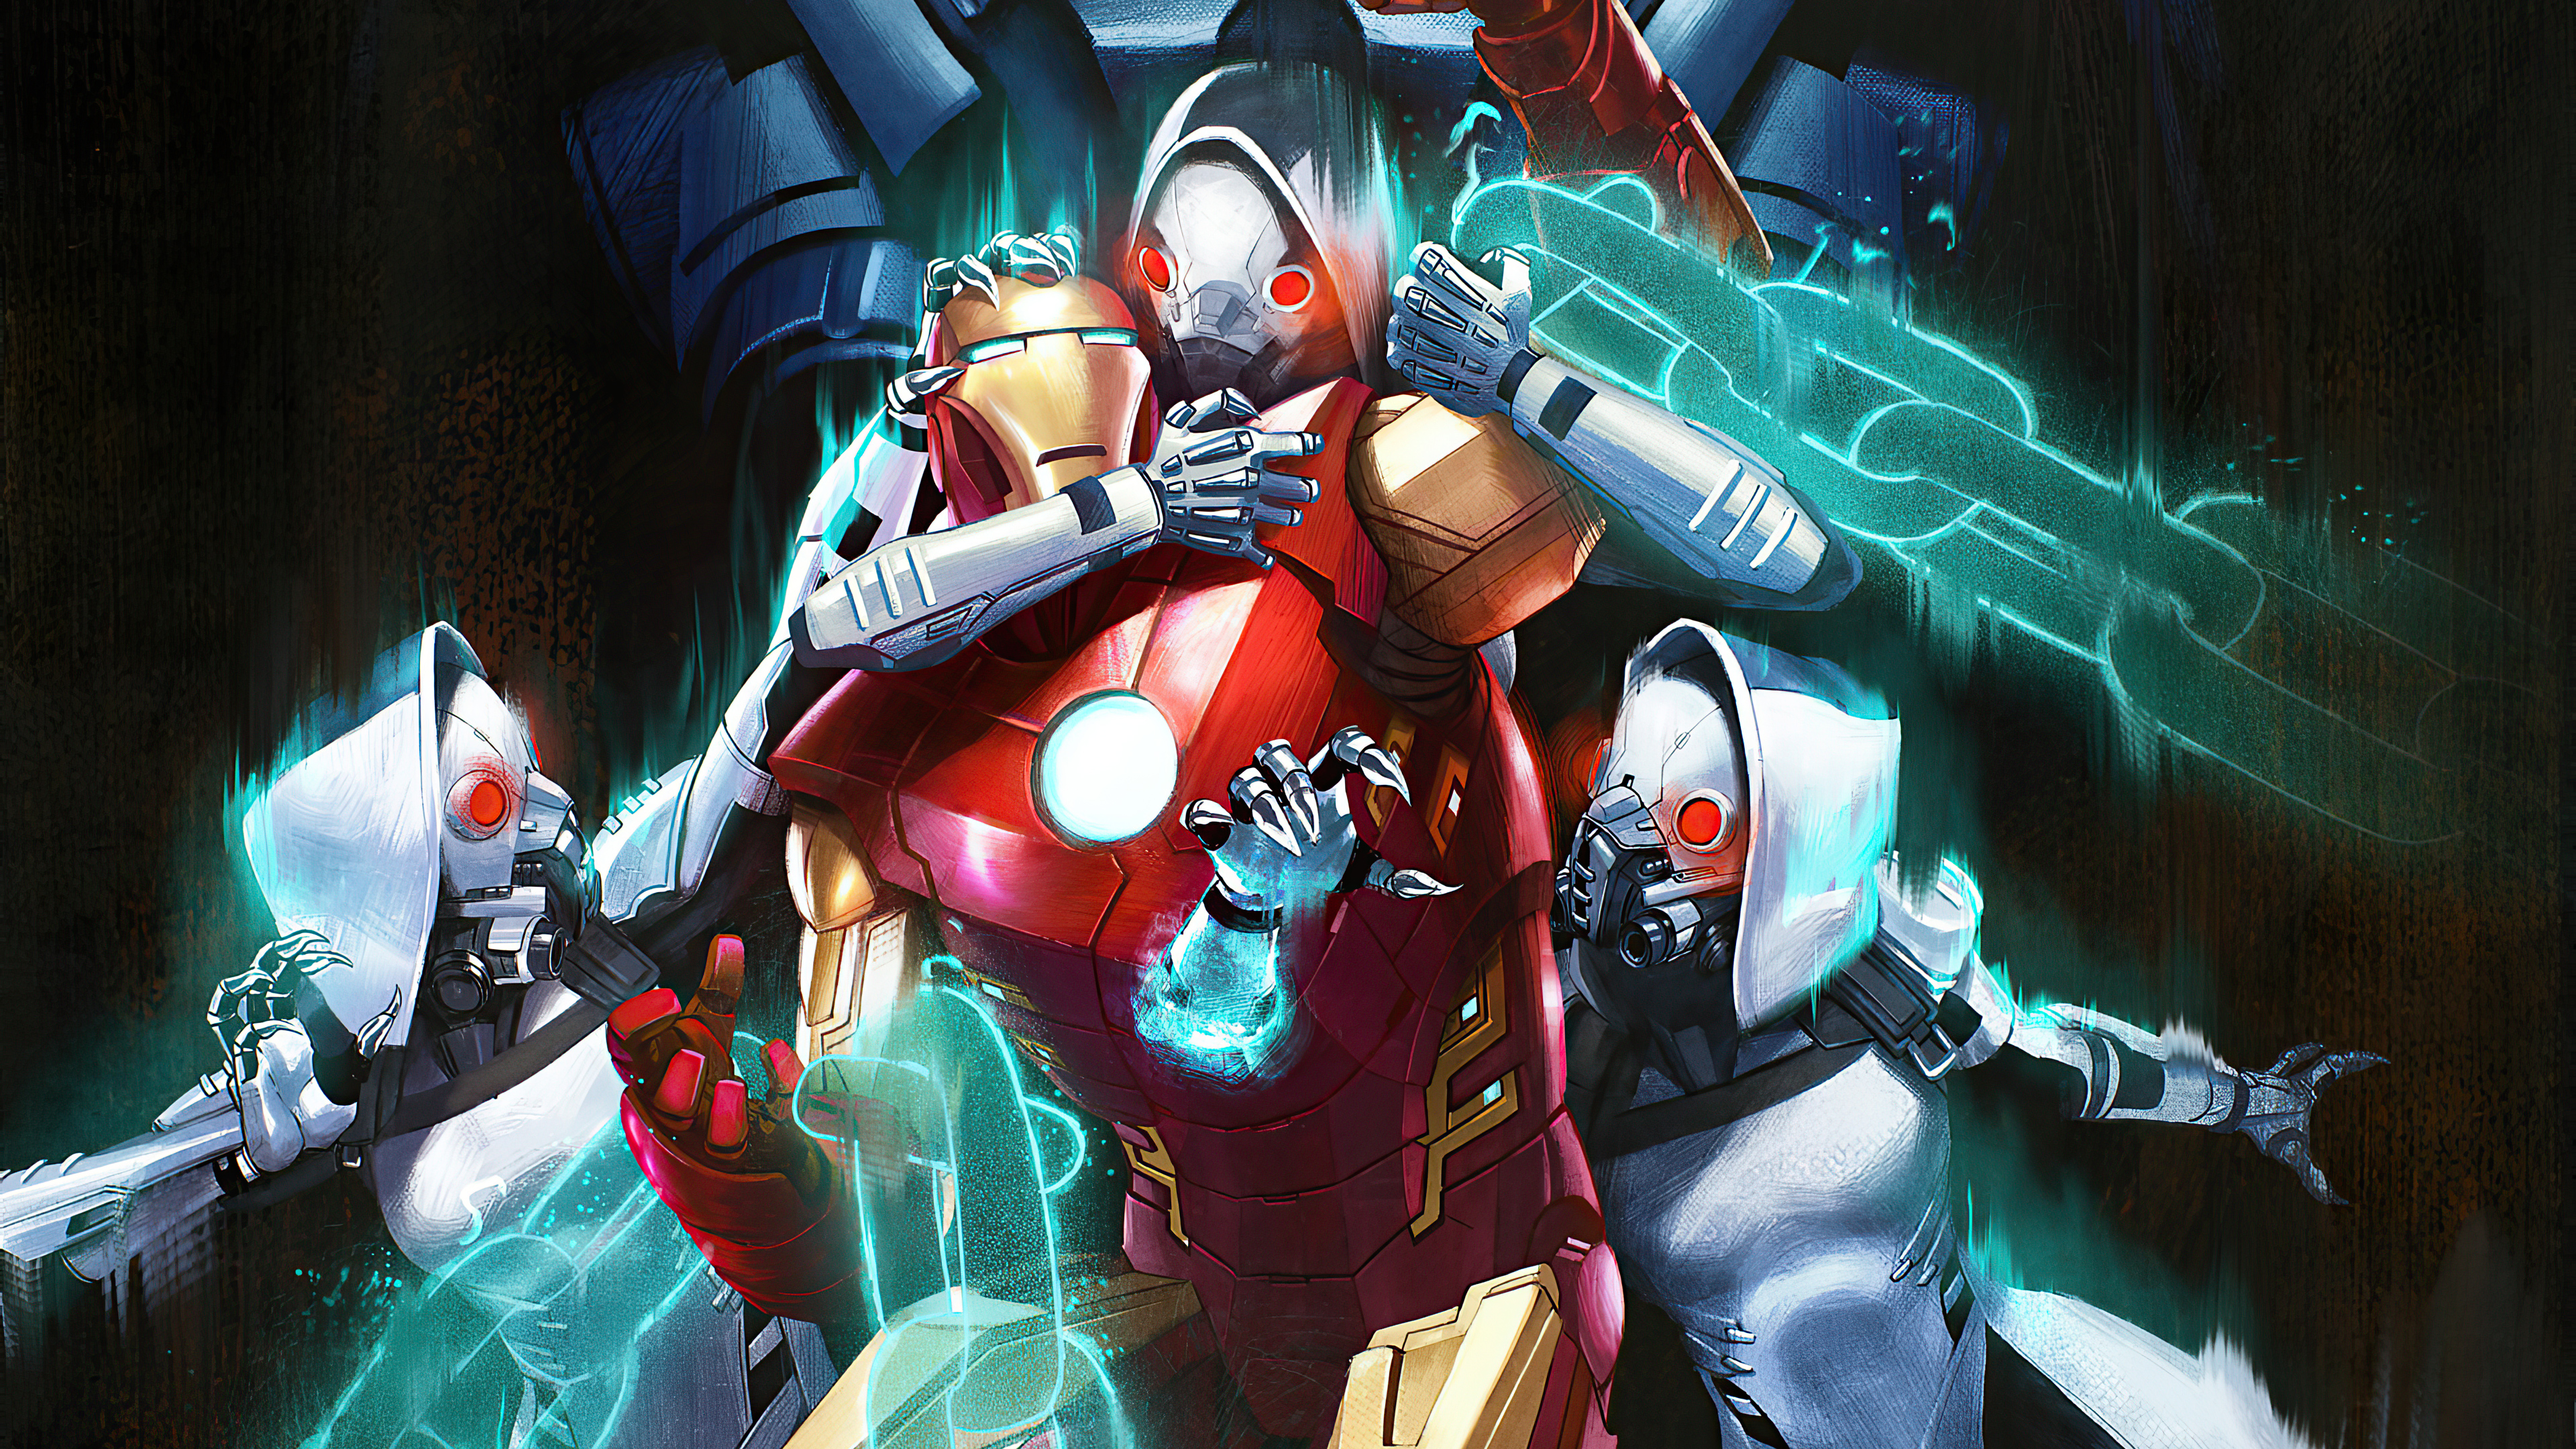 Iron Man and The Ghost — a creepy master of corporate espionage by Tim Tsang